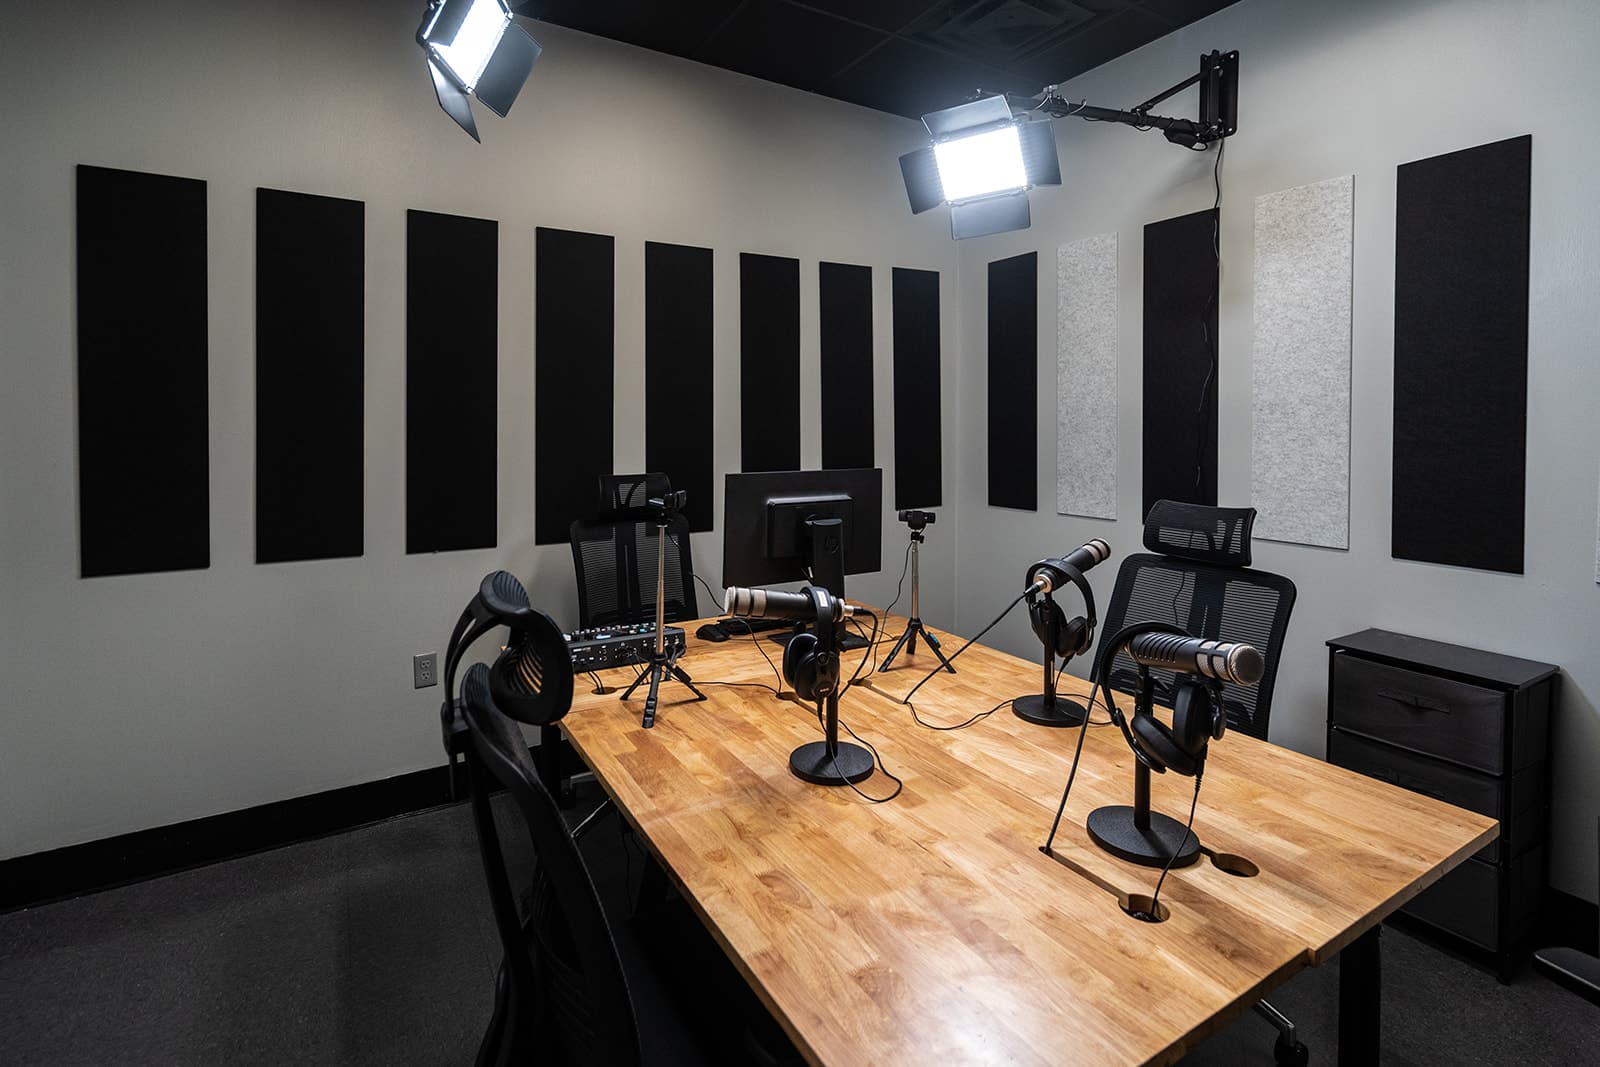 podcast room setup with soundproofing wall mountings